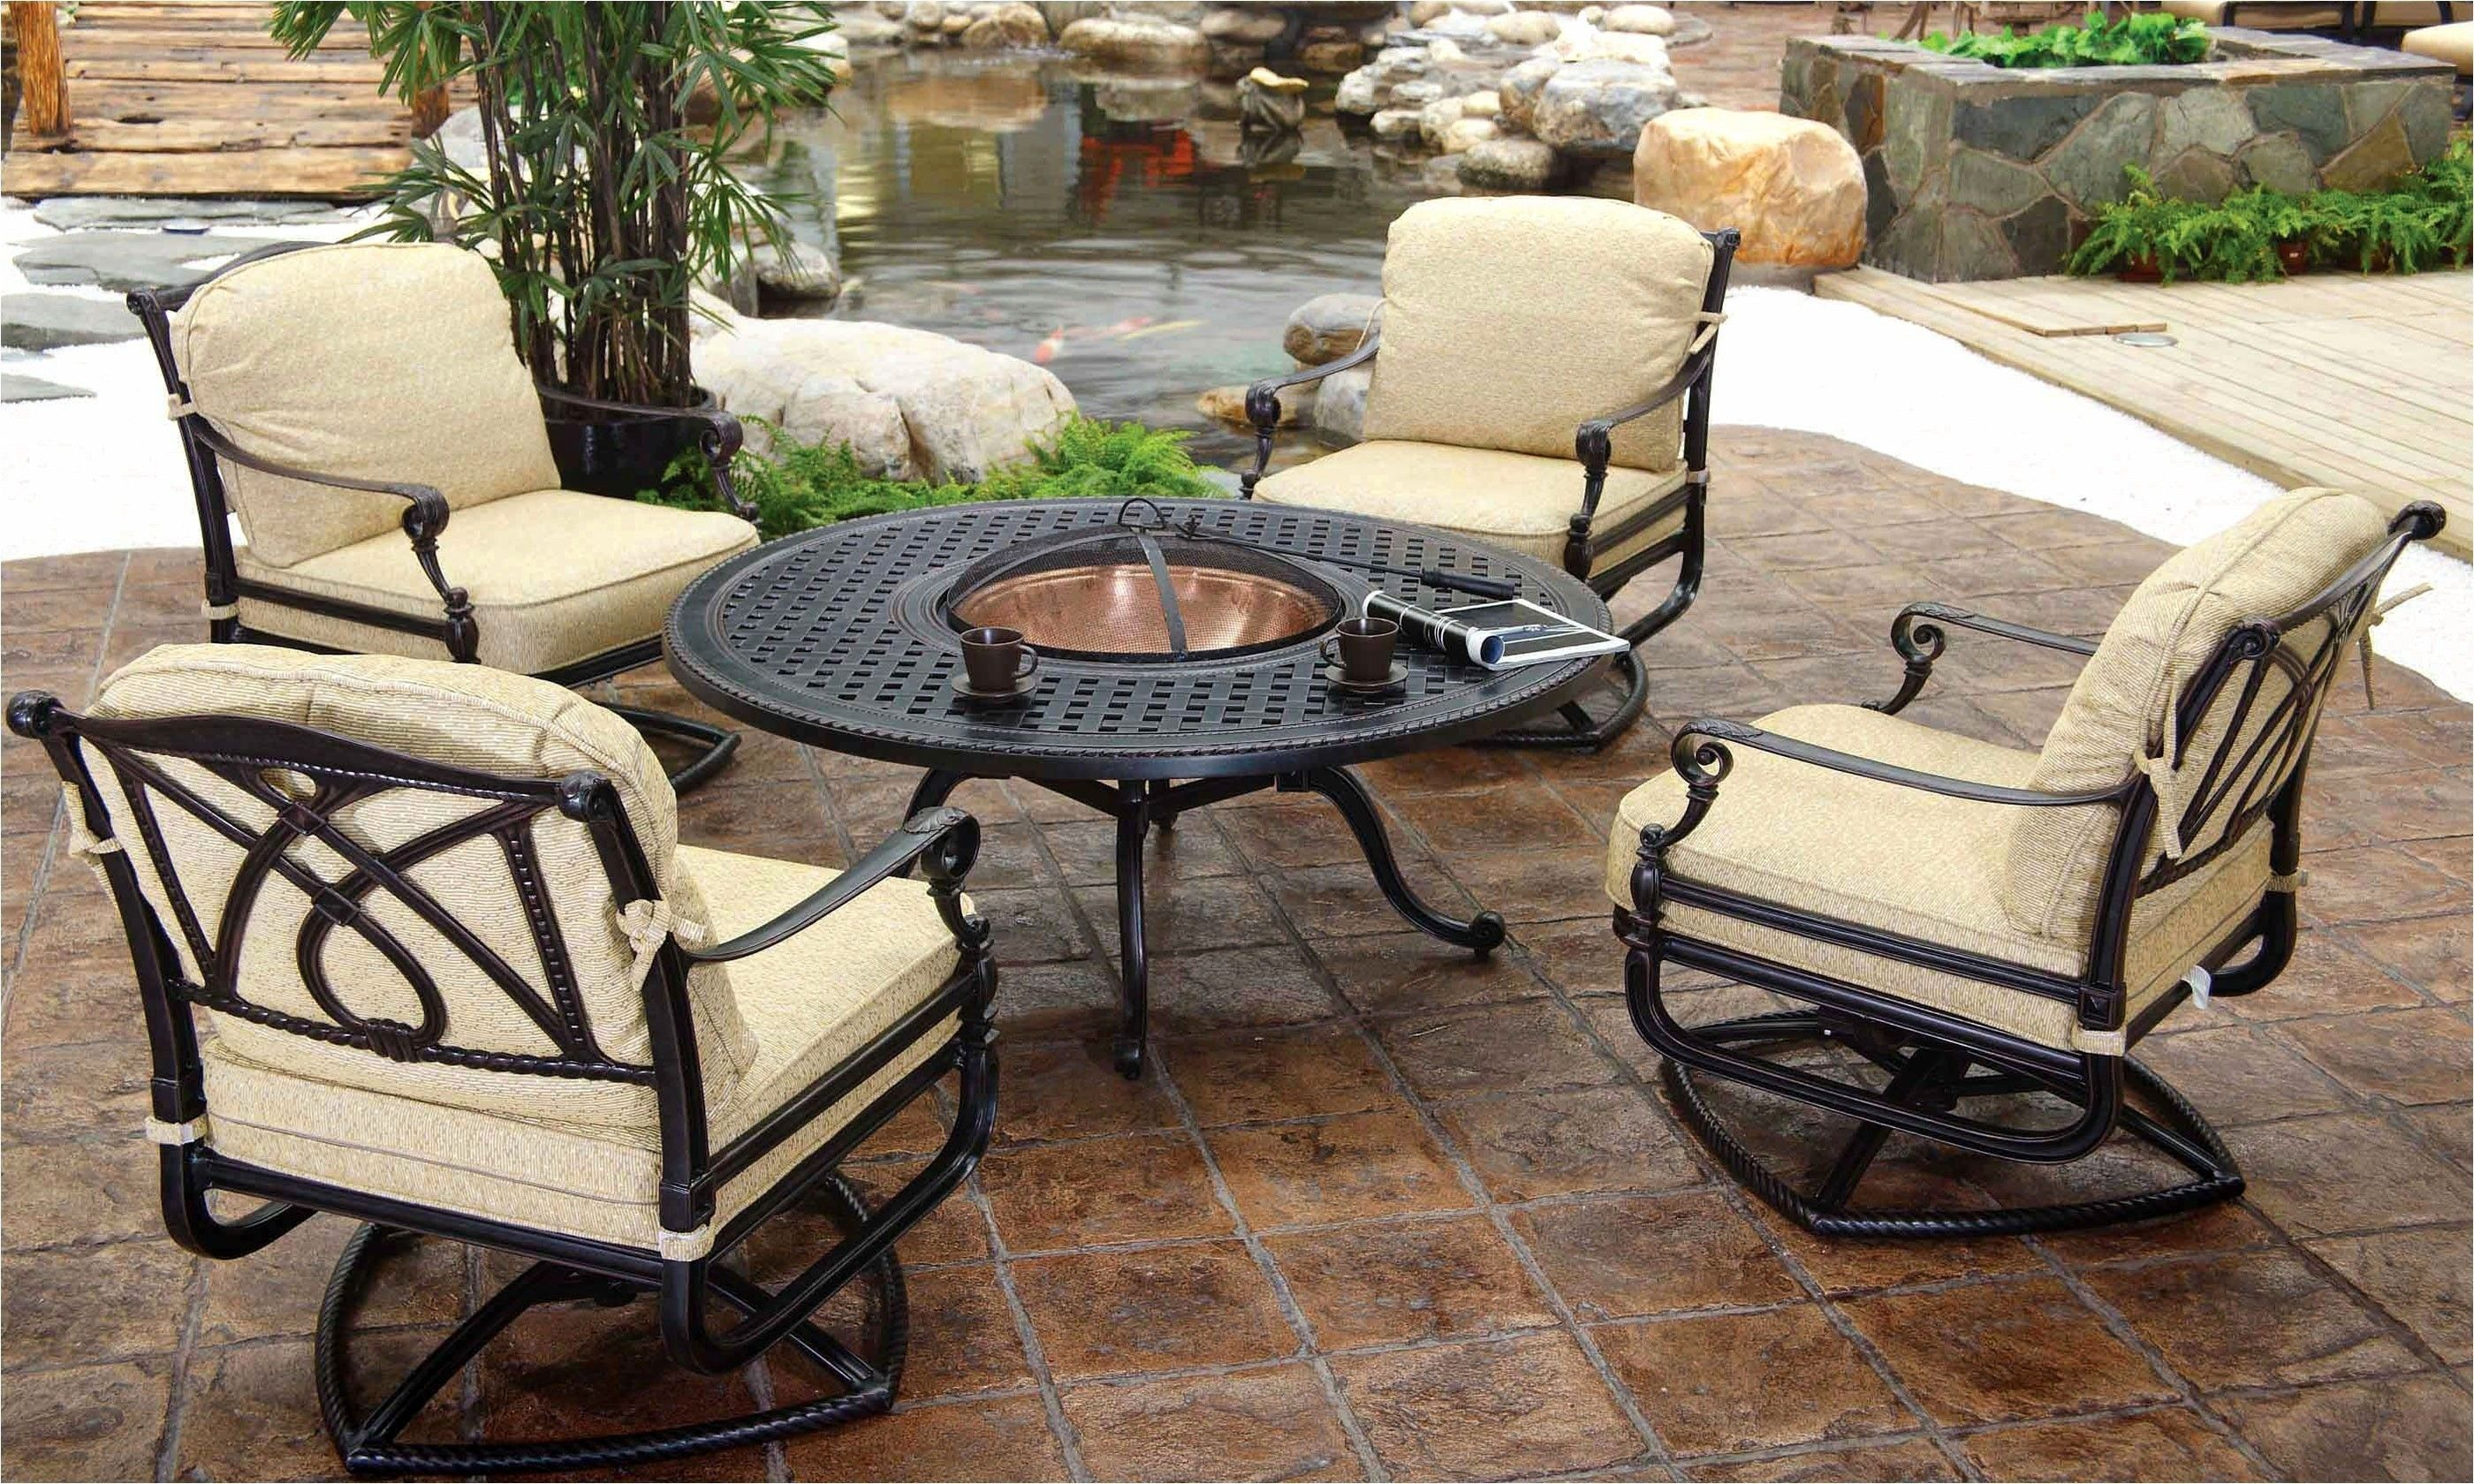 Best Patio Furniture Covers Patio Ideas Patio Furniture in size 2800 X 1680